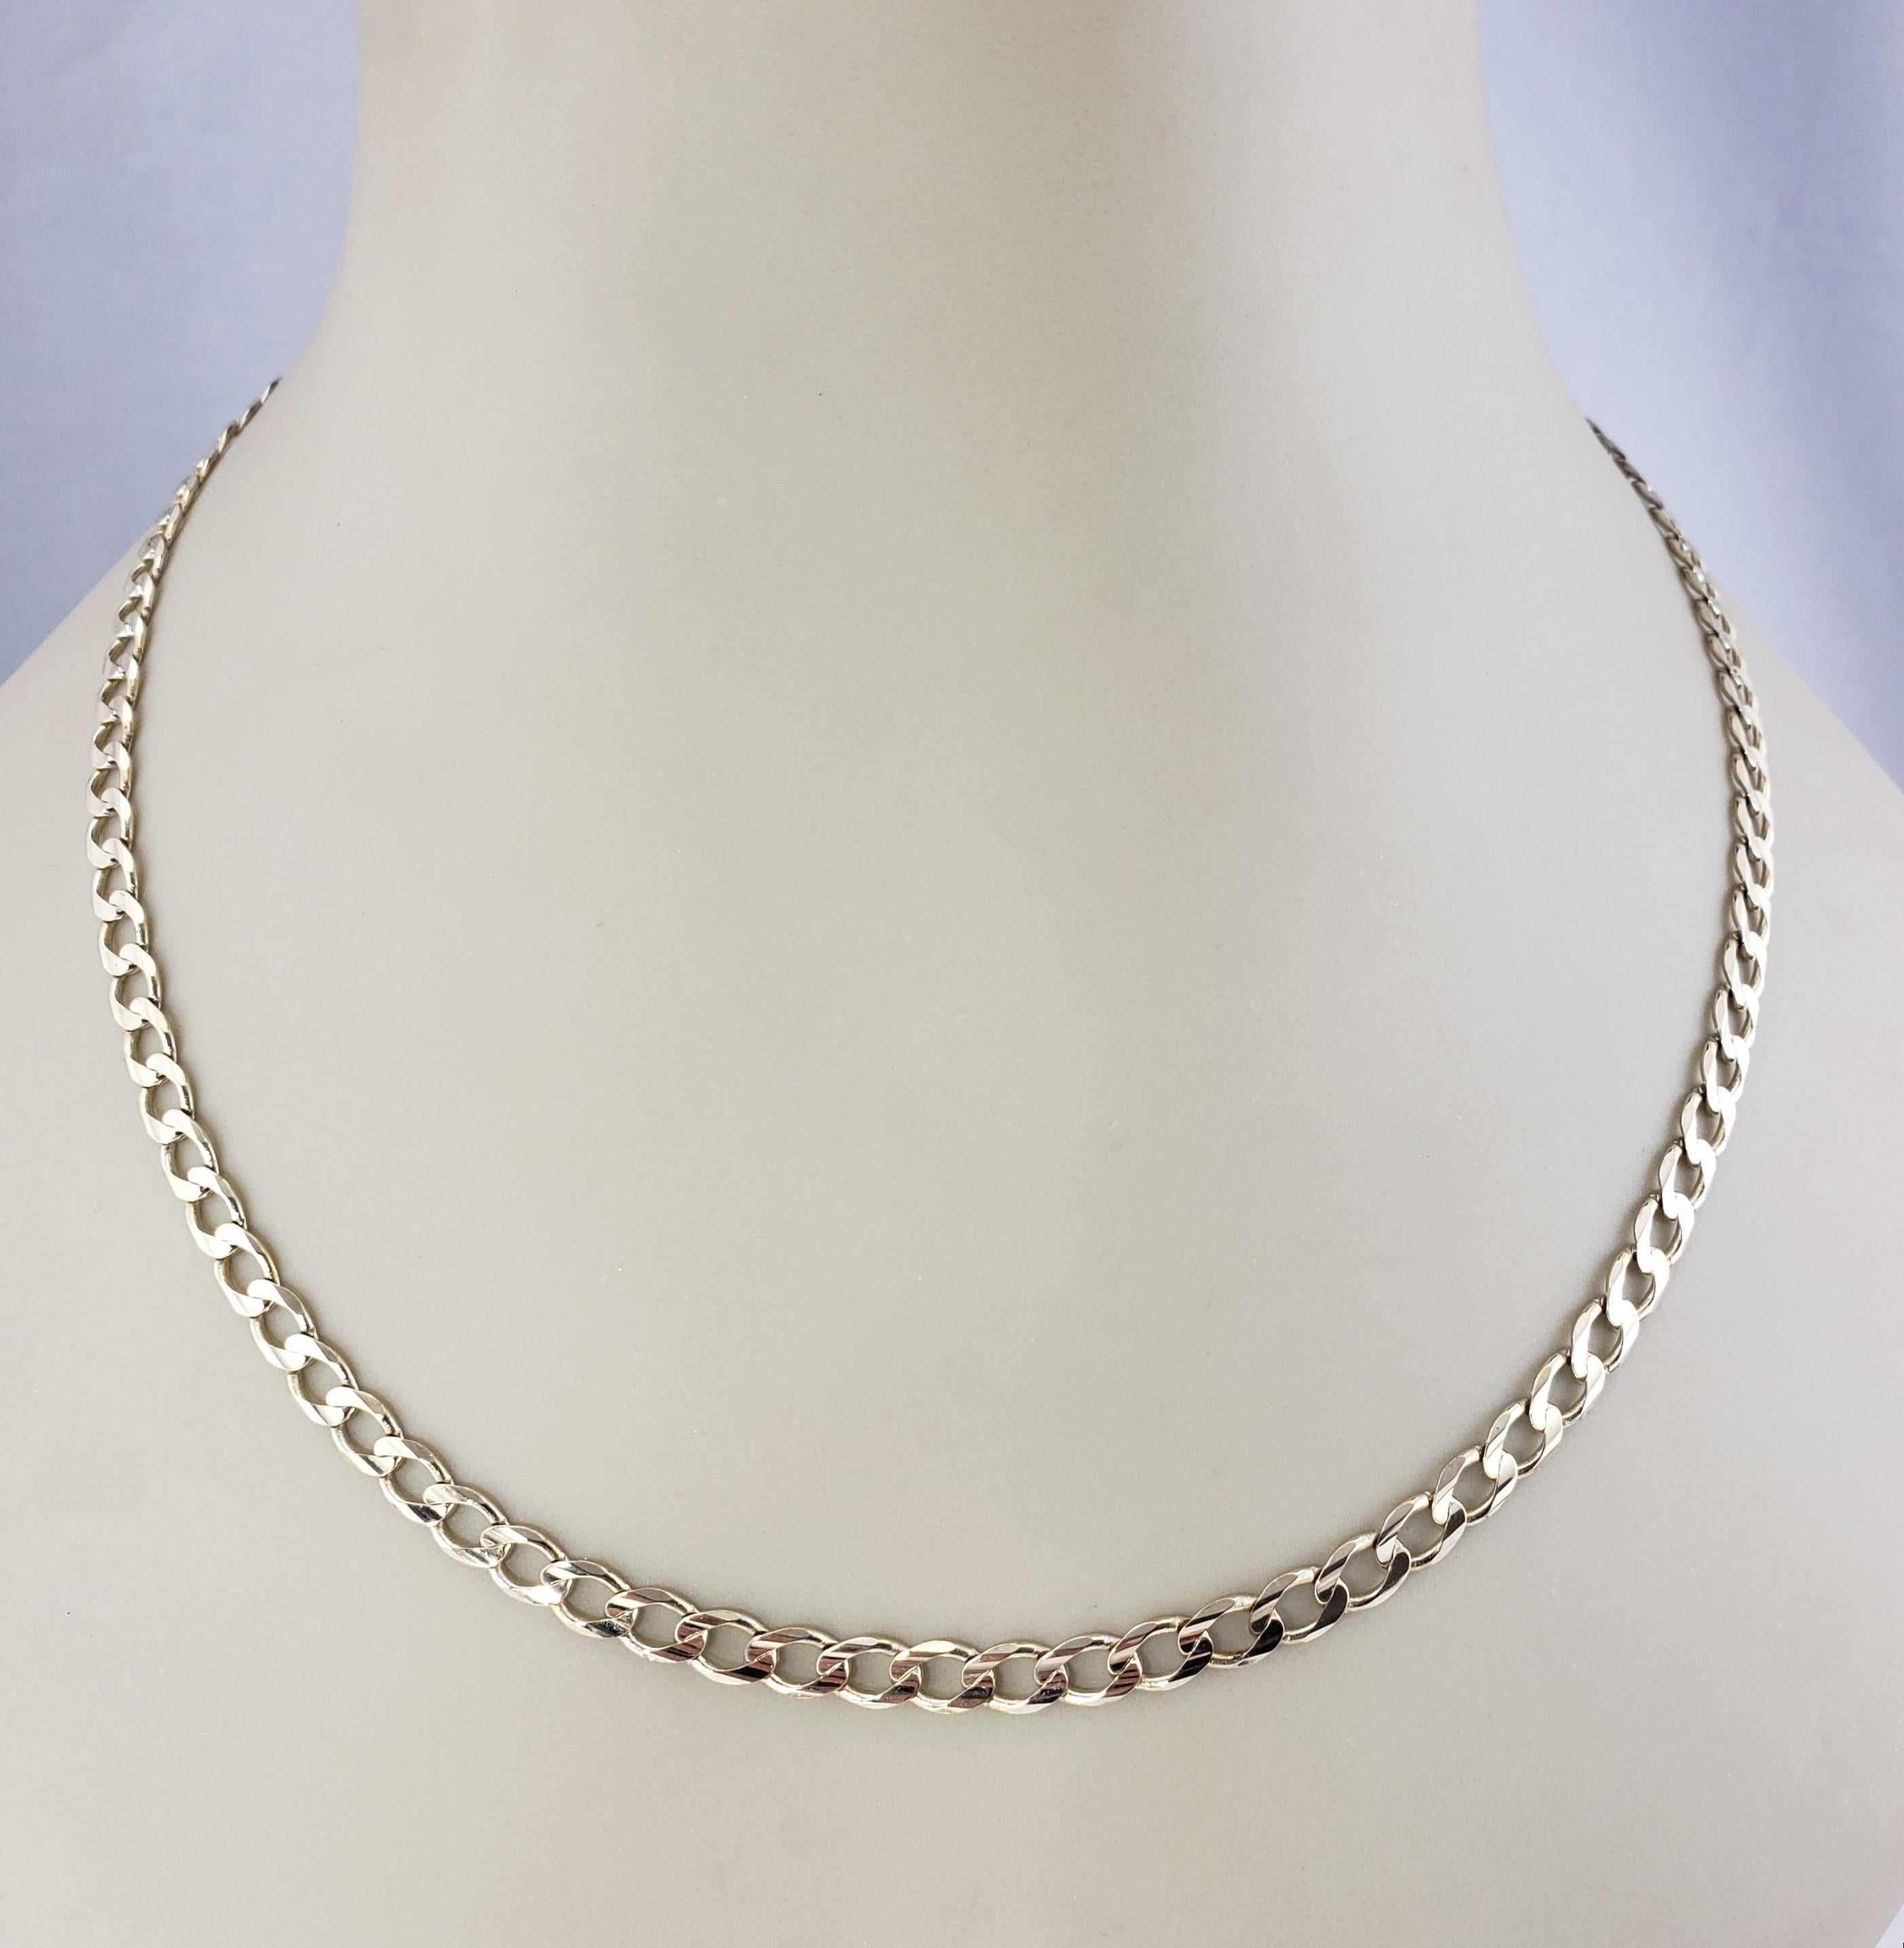 Vintage 10 Karat Yellow Gold Curb Chain Necklace #15329 For Sale 2